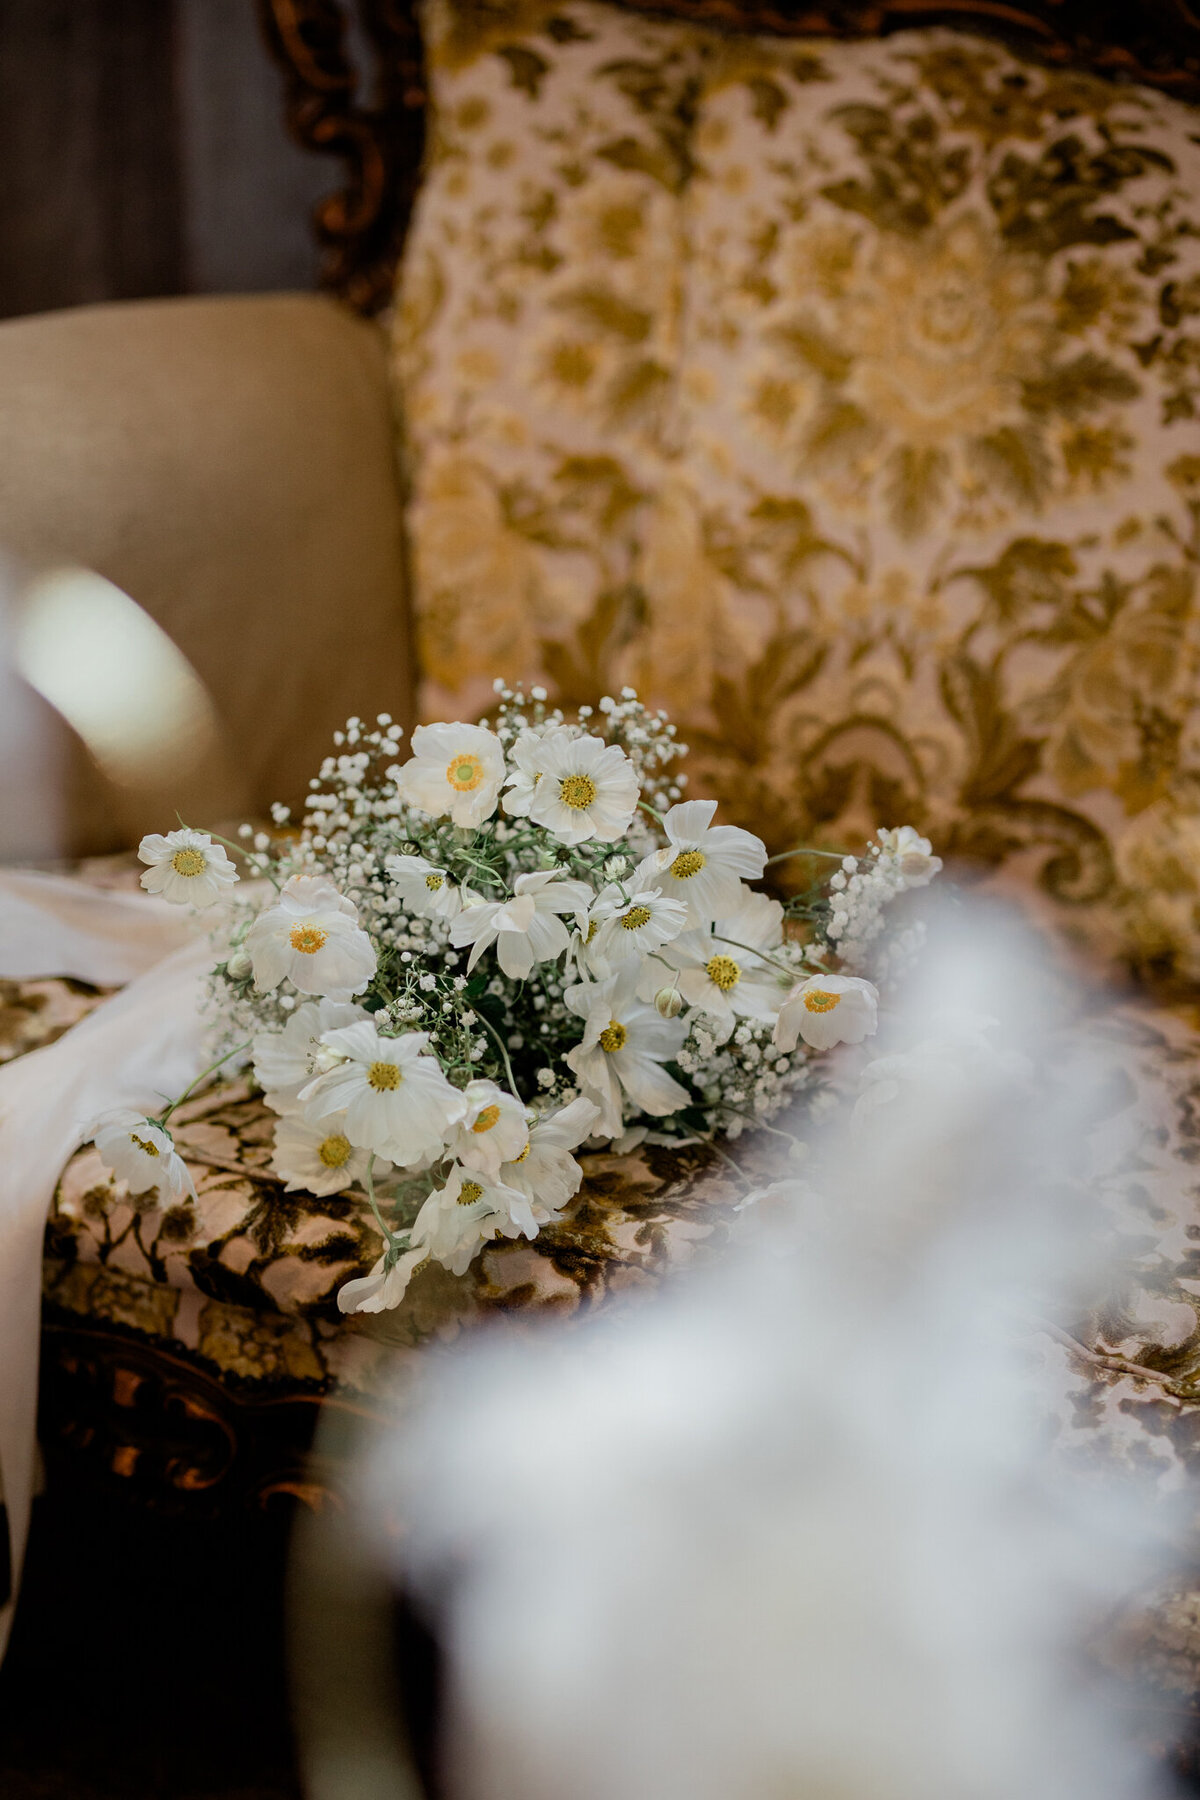 A simple shot of a bouquet on a chair